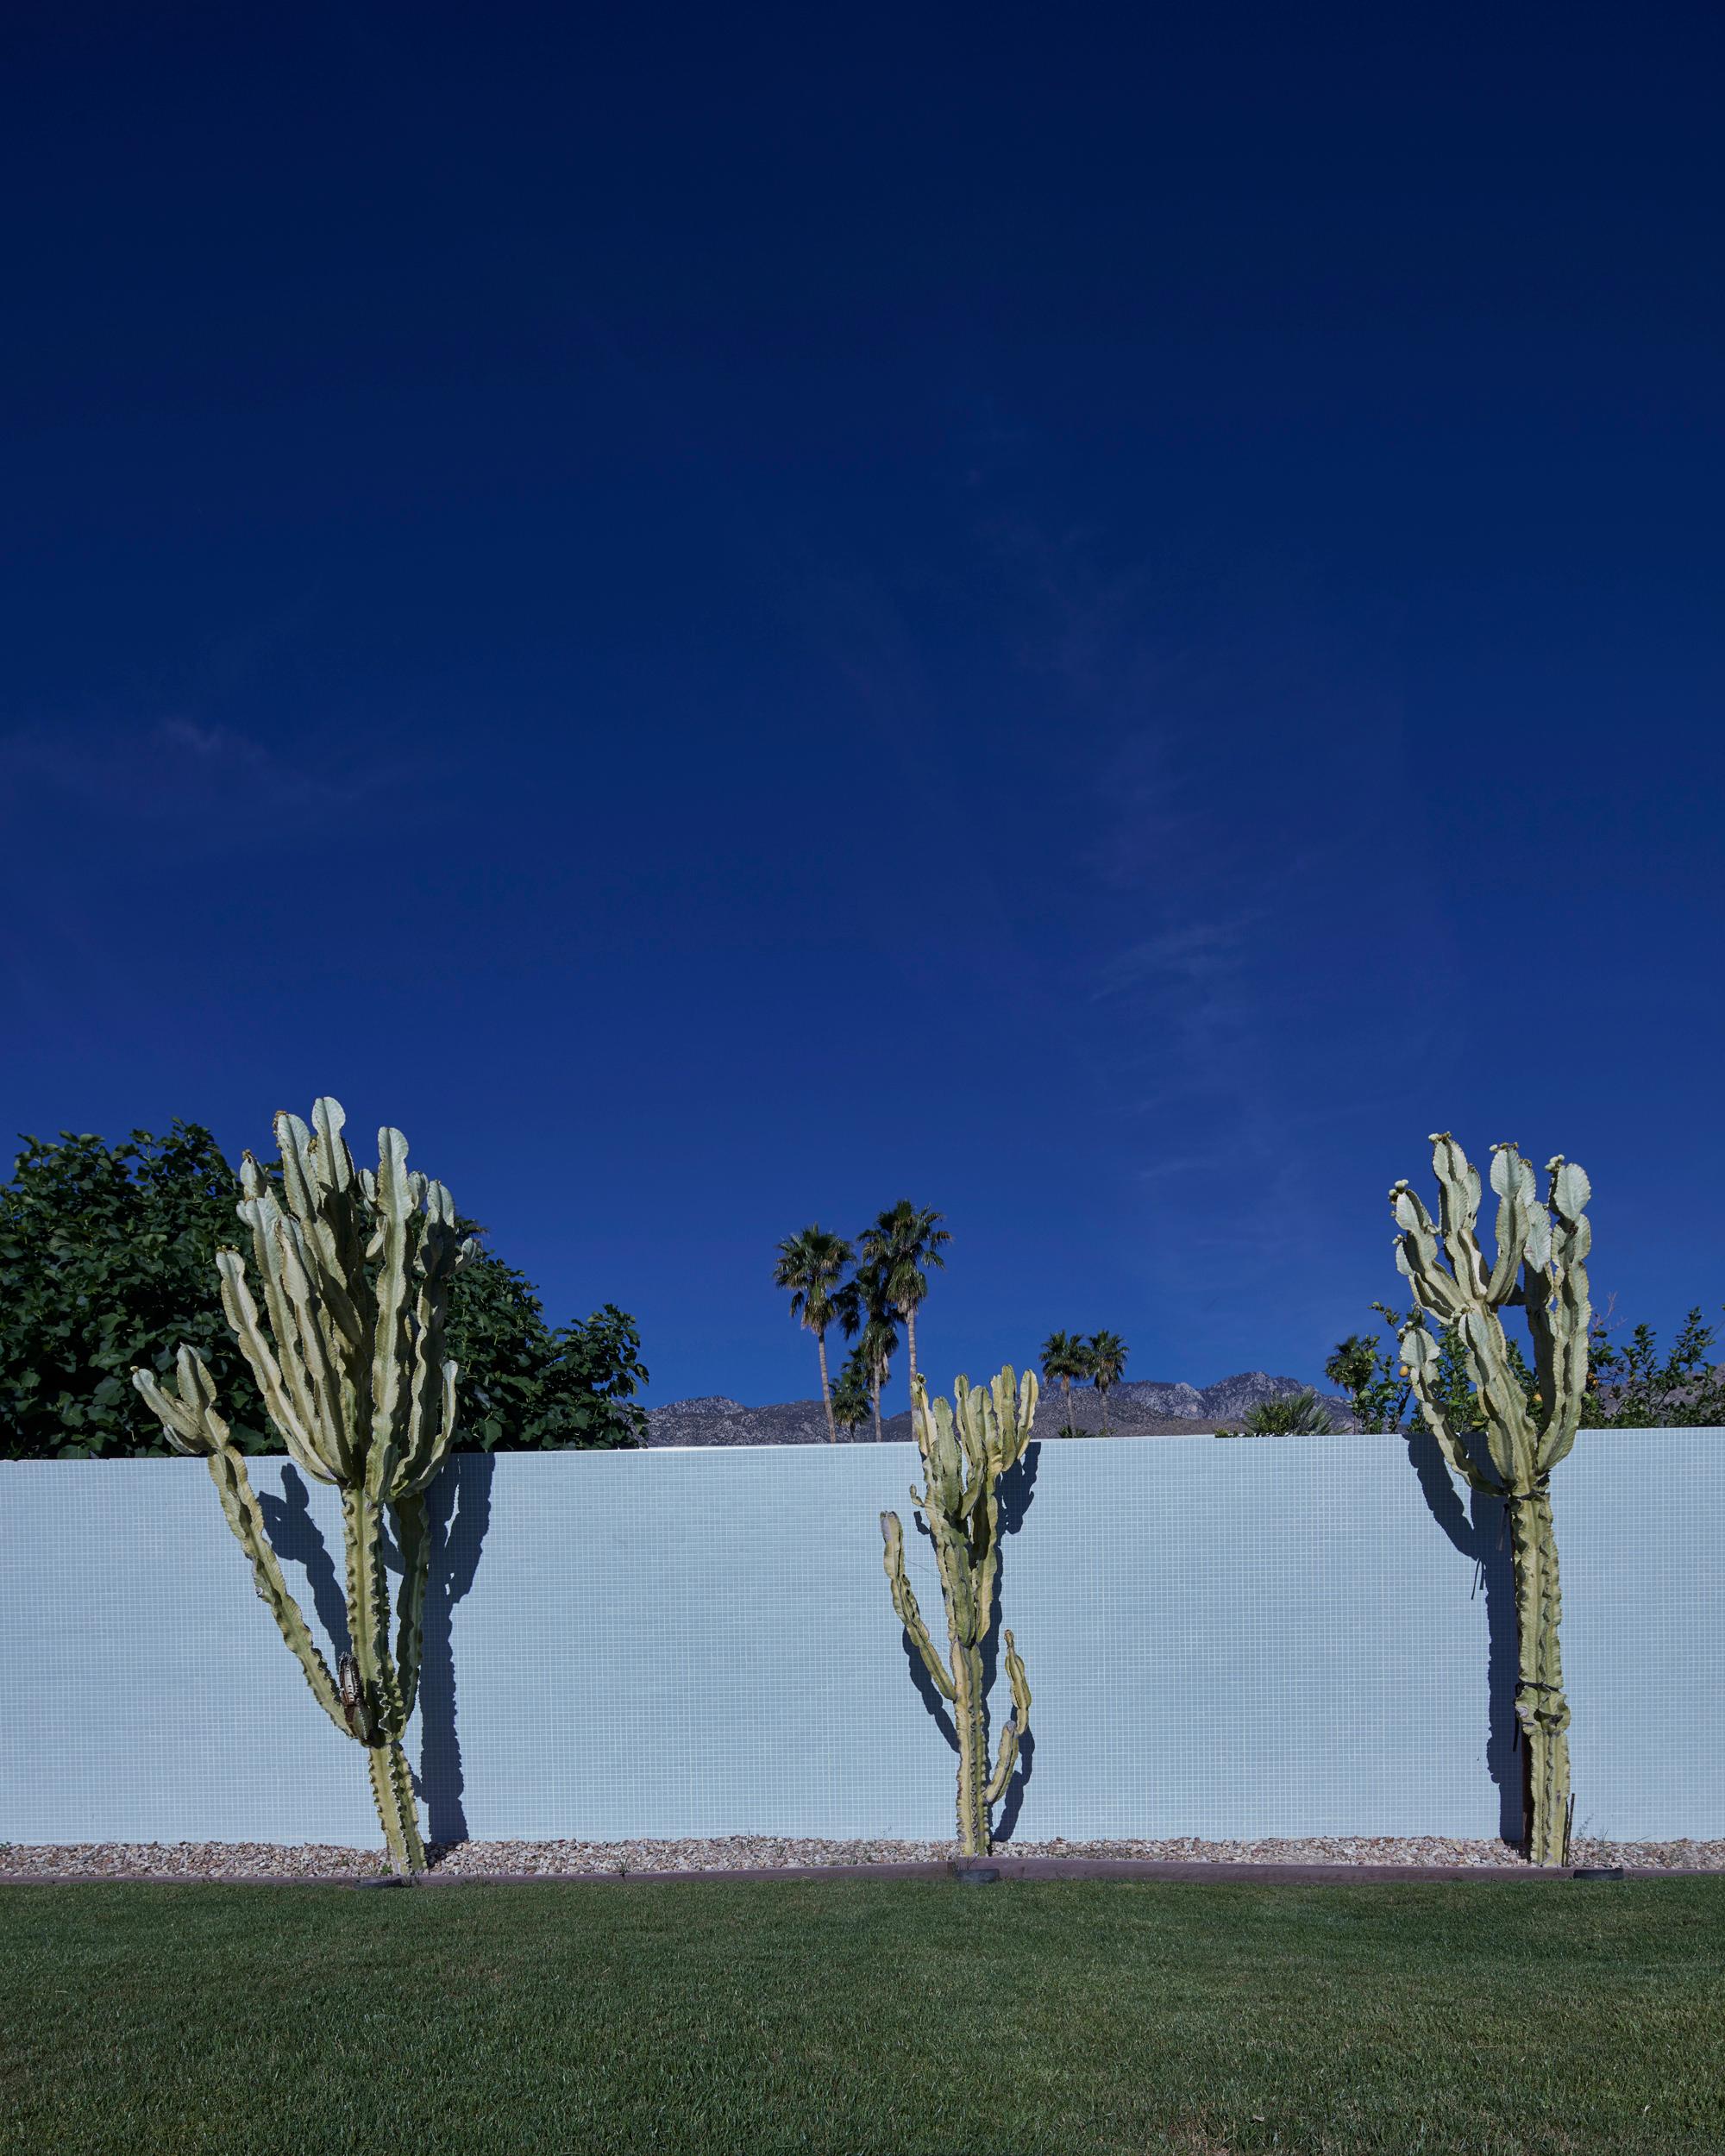 Palm Springs ( Cactus ) - a study of iconic mid century desert architecture